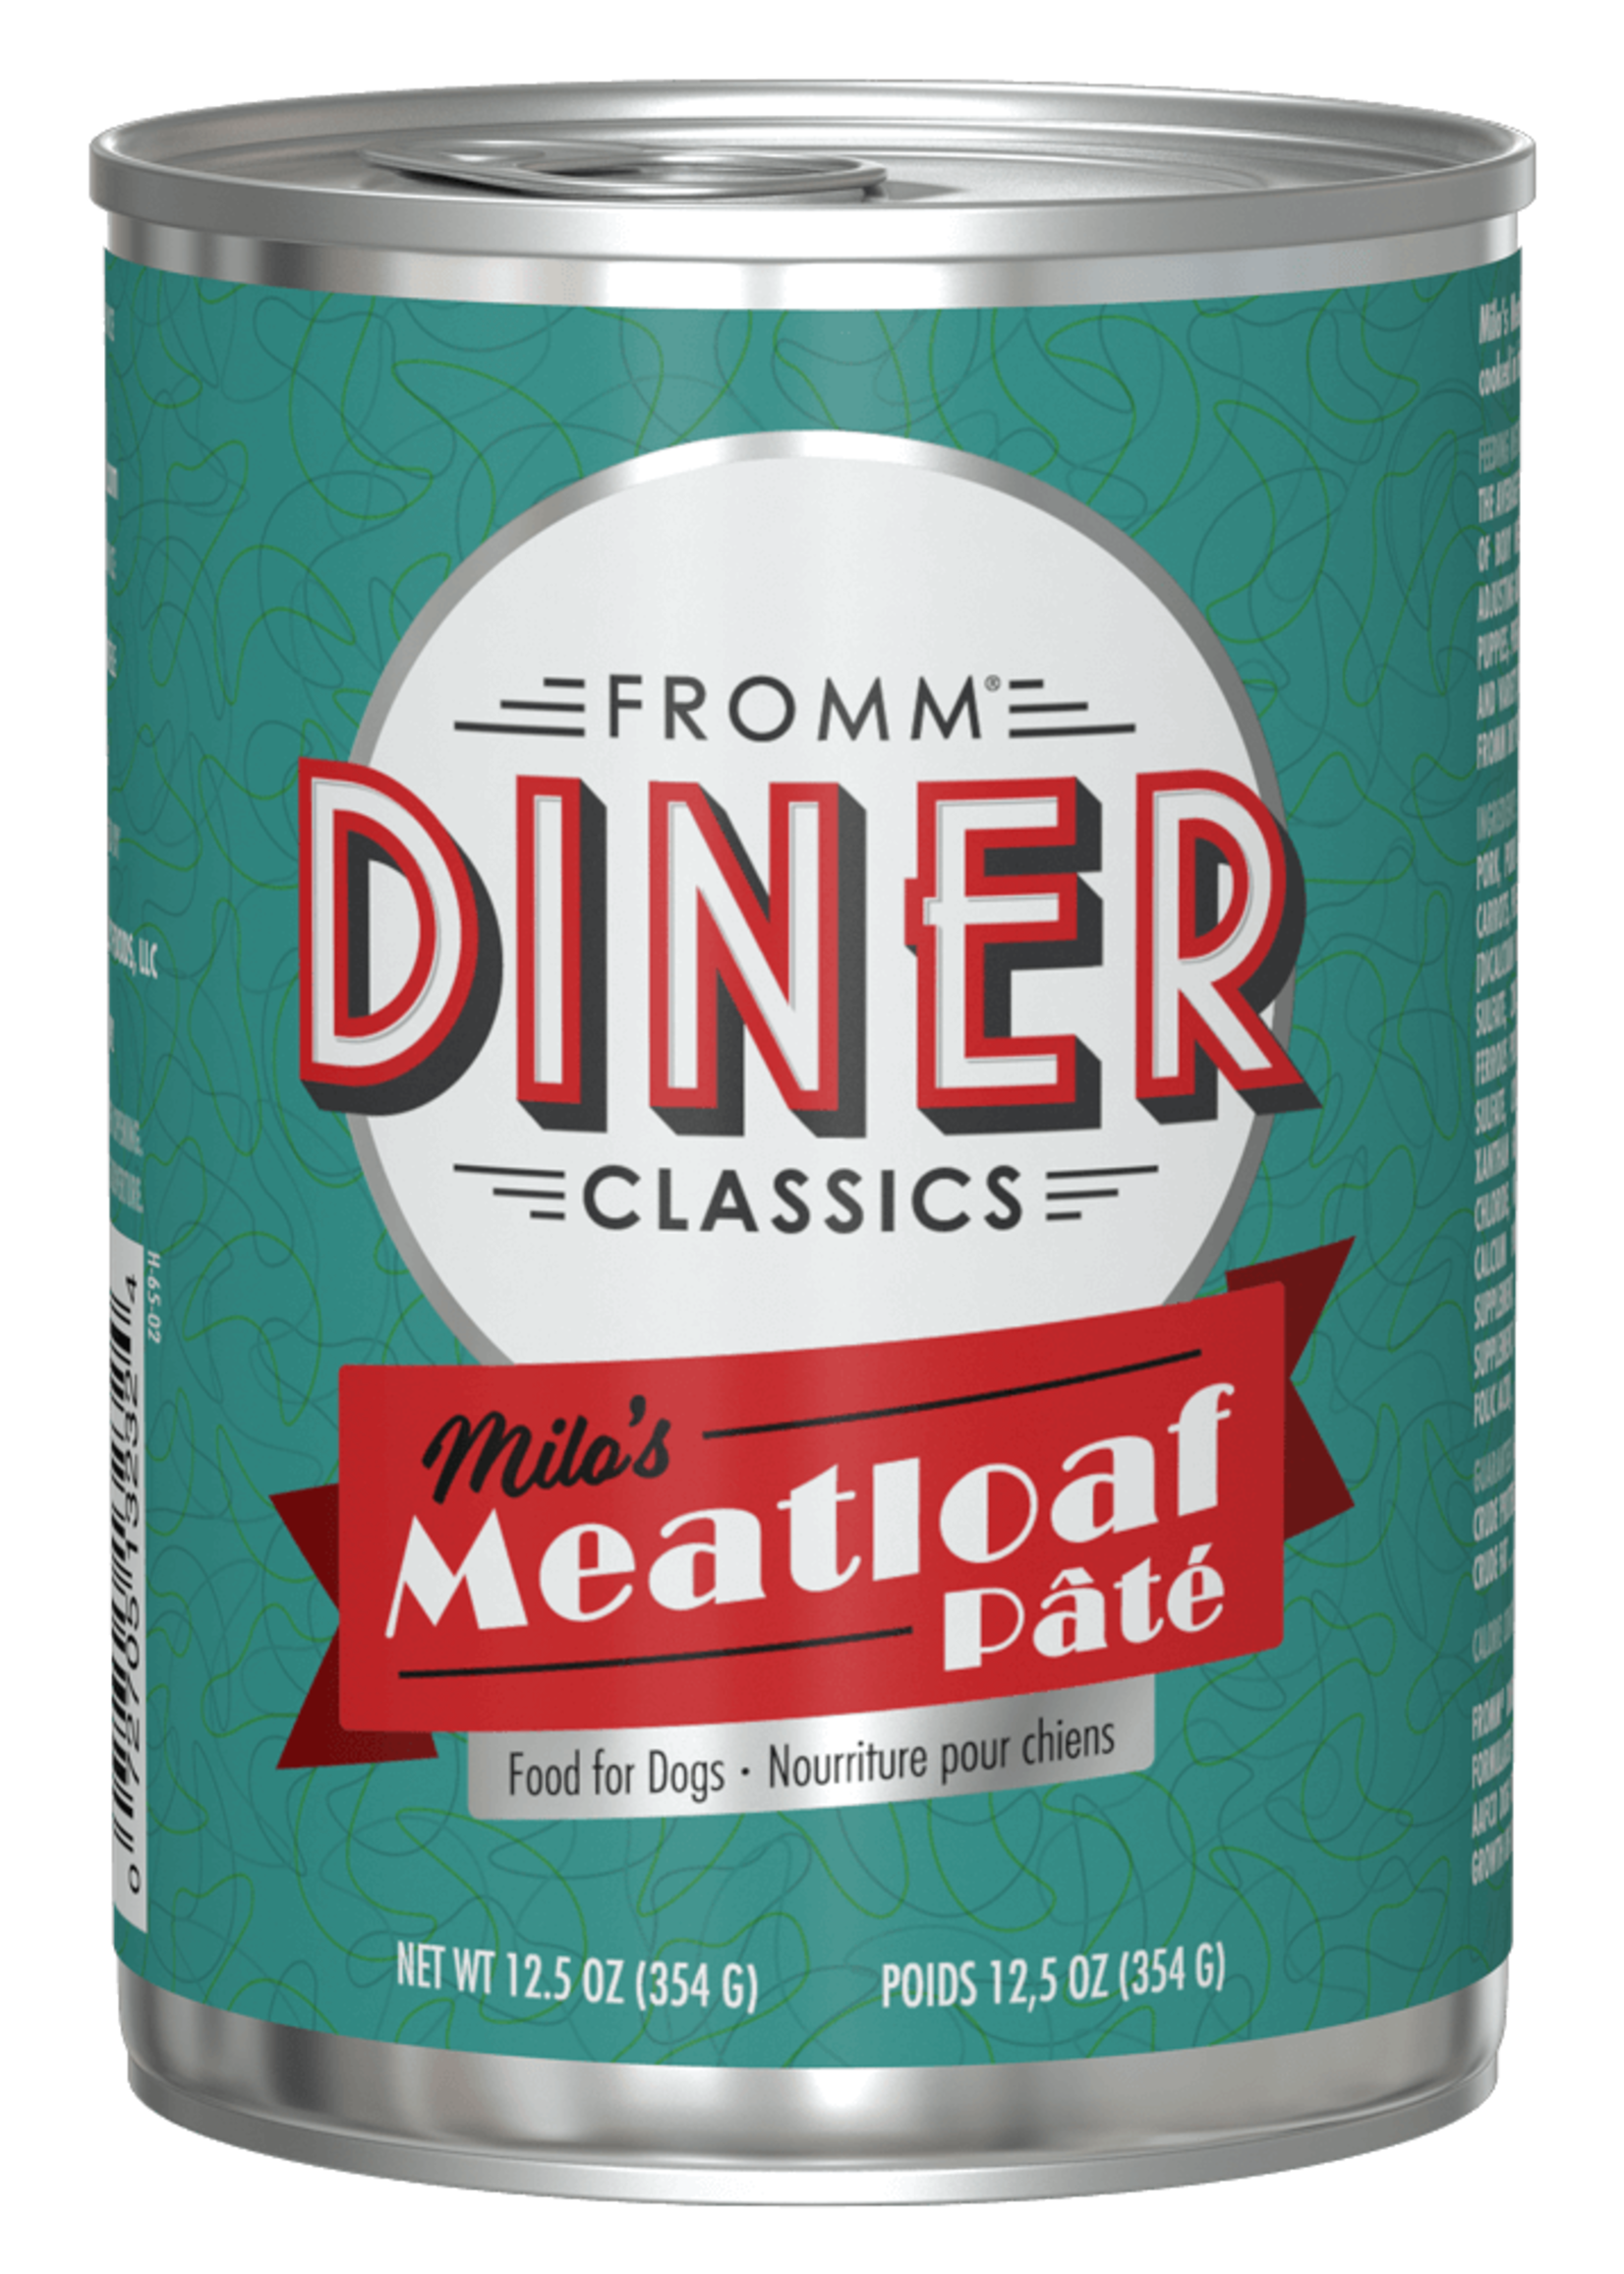 Fromm Family Pet Food Fromm Dog Diner Classics Milo's Meatloaf Pate 12/12.5 oz